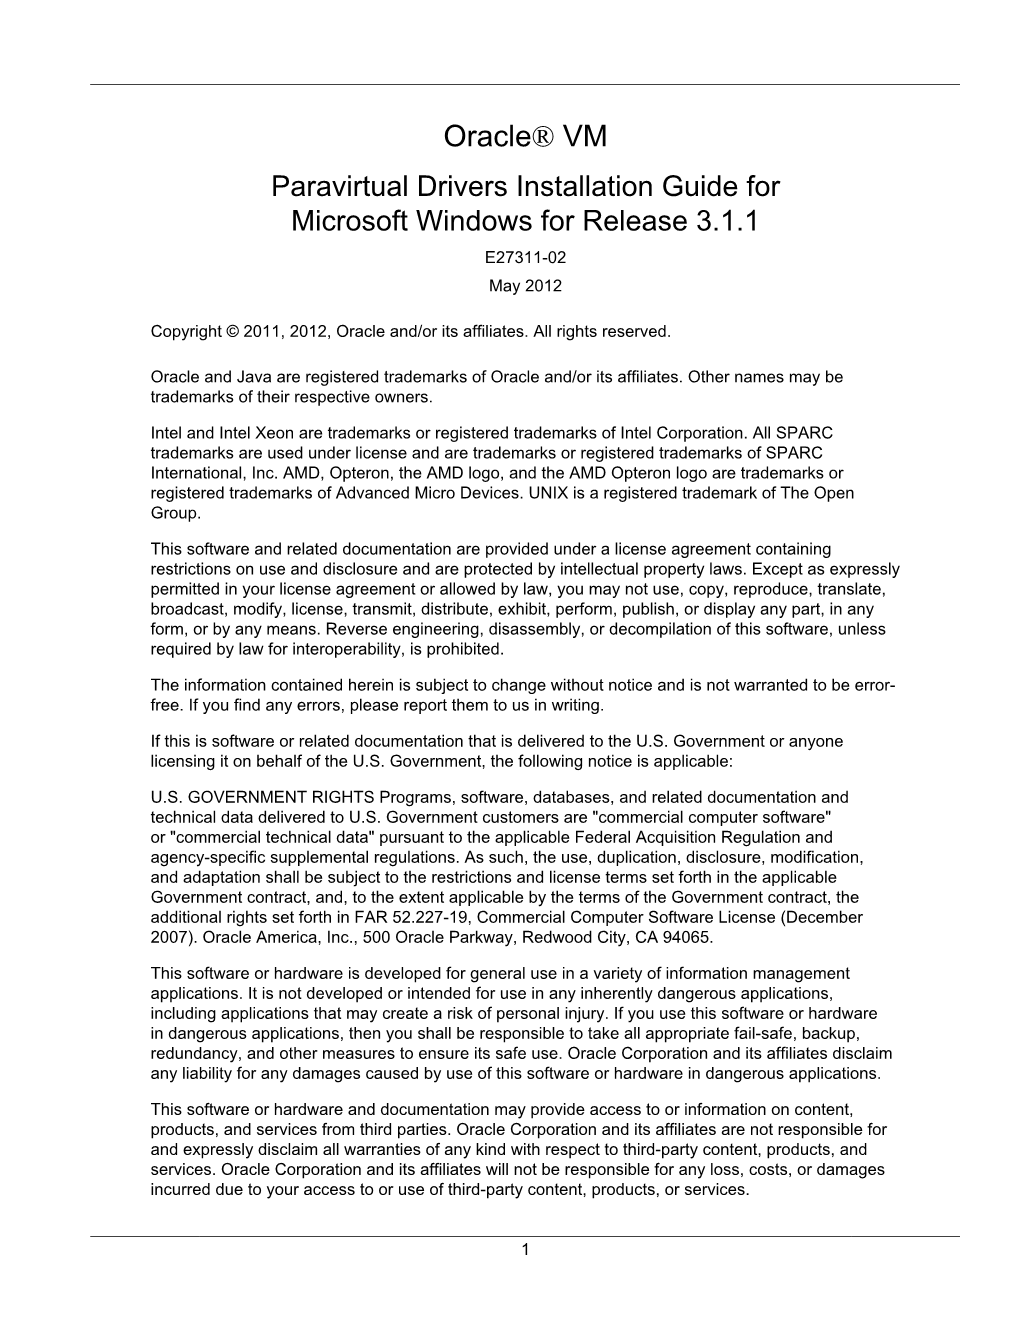 Oracle® VM Paravirtual Drivers Installation Guide for Microsoft Windows for Release 3.1.1 E27311-02 May 2012